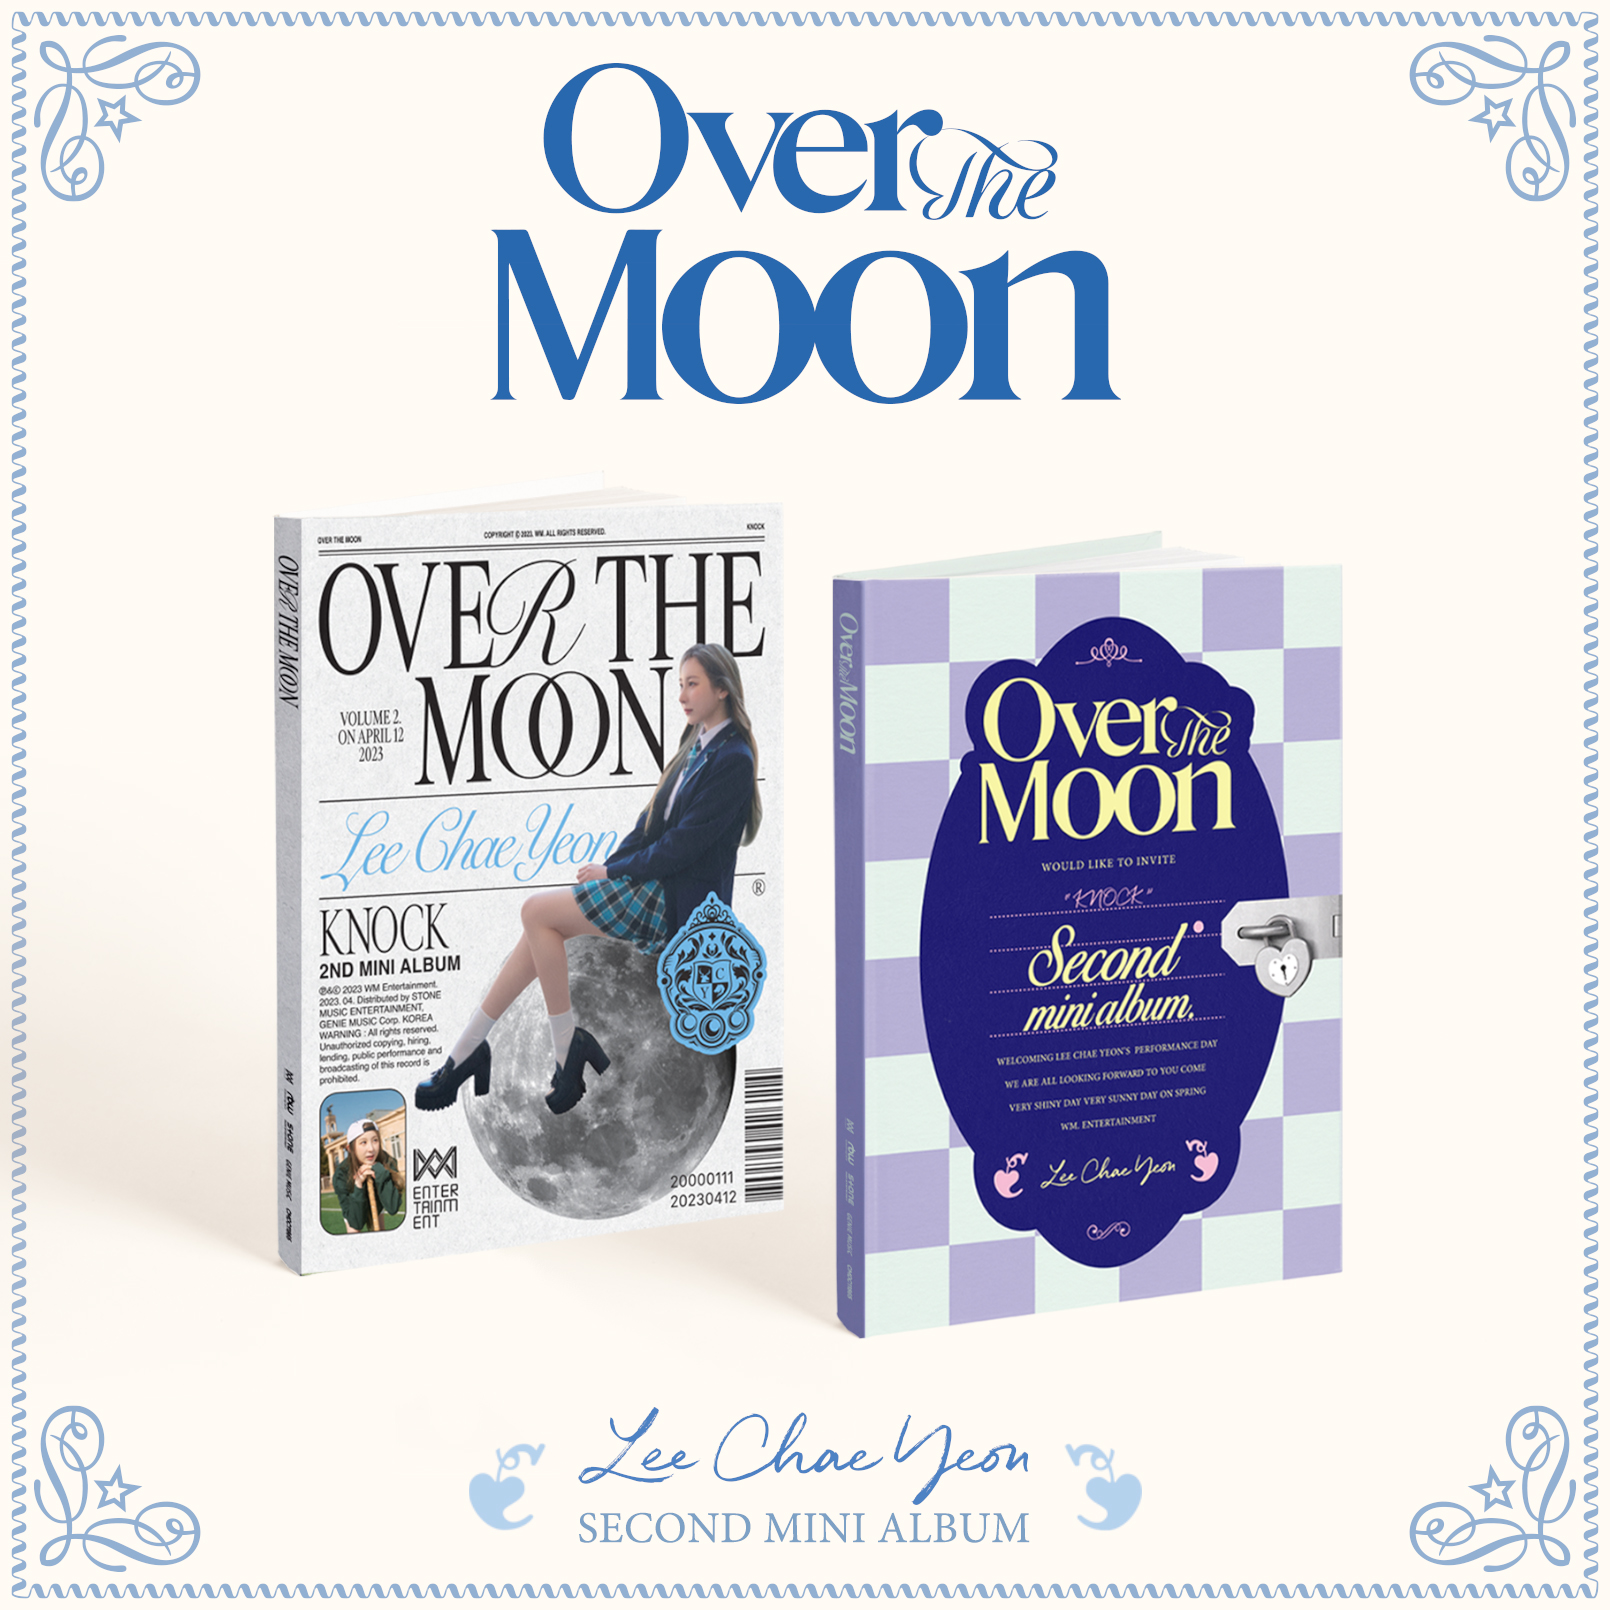 [2CD SET] Lee Chae Yeon - 2nd Mini Album [Over The Moon] (DAY Ver. + NIGHT Ver.)